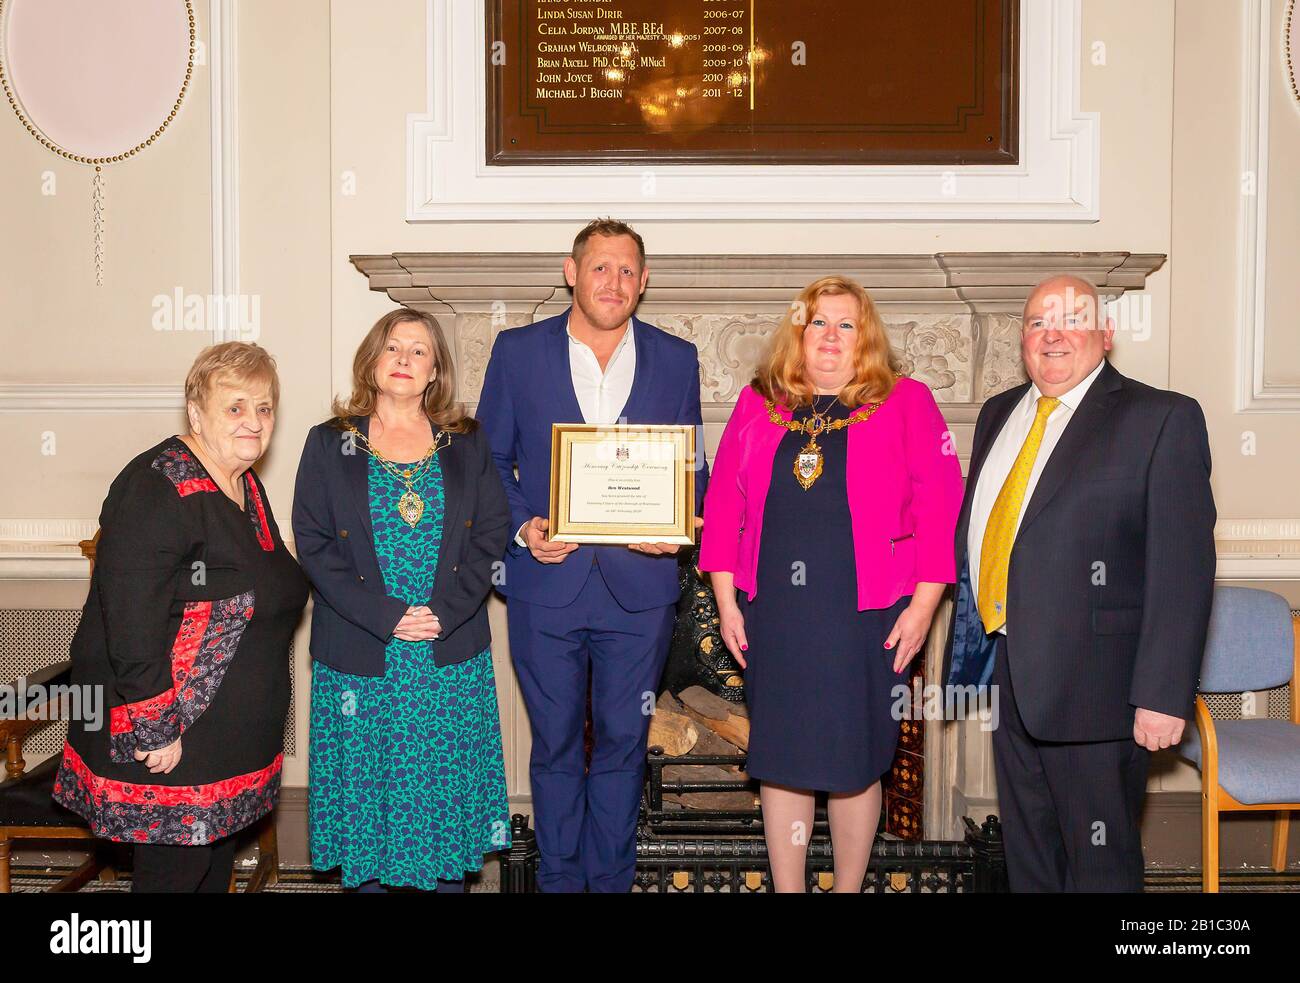 Warrington, UK. 24th Feb 2020. Ben Westwood recieves his certificate as Honorary Citizen of Warrington Town from Mayor Wendy Johnson, with Consort Beverley Hallam, nominator Councillor Mike Hannon and sconder Cllr Pauline Nelson Credit: John Hopkins/Alamy Live News Stock Photo